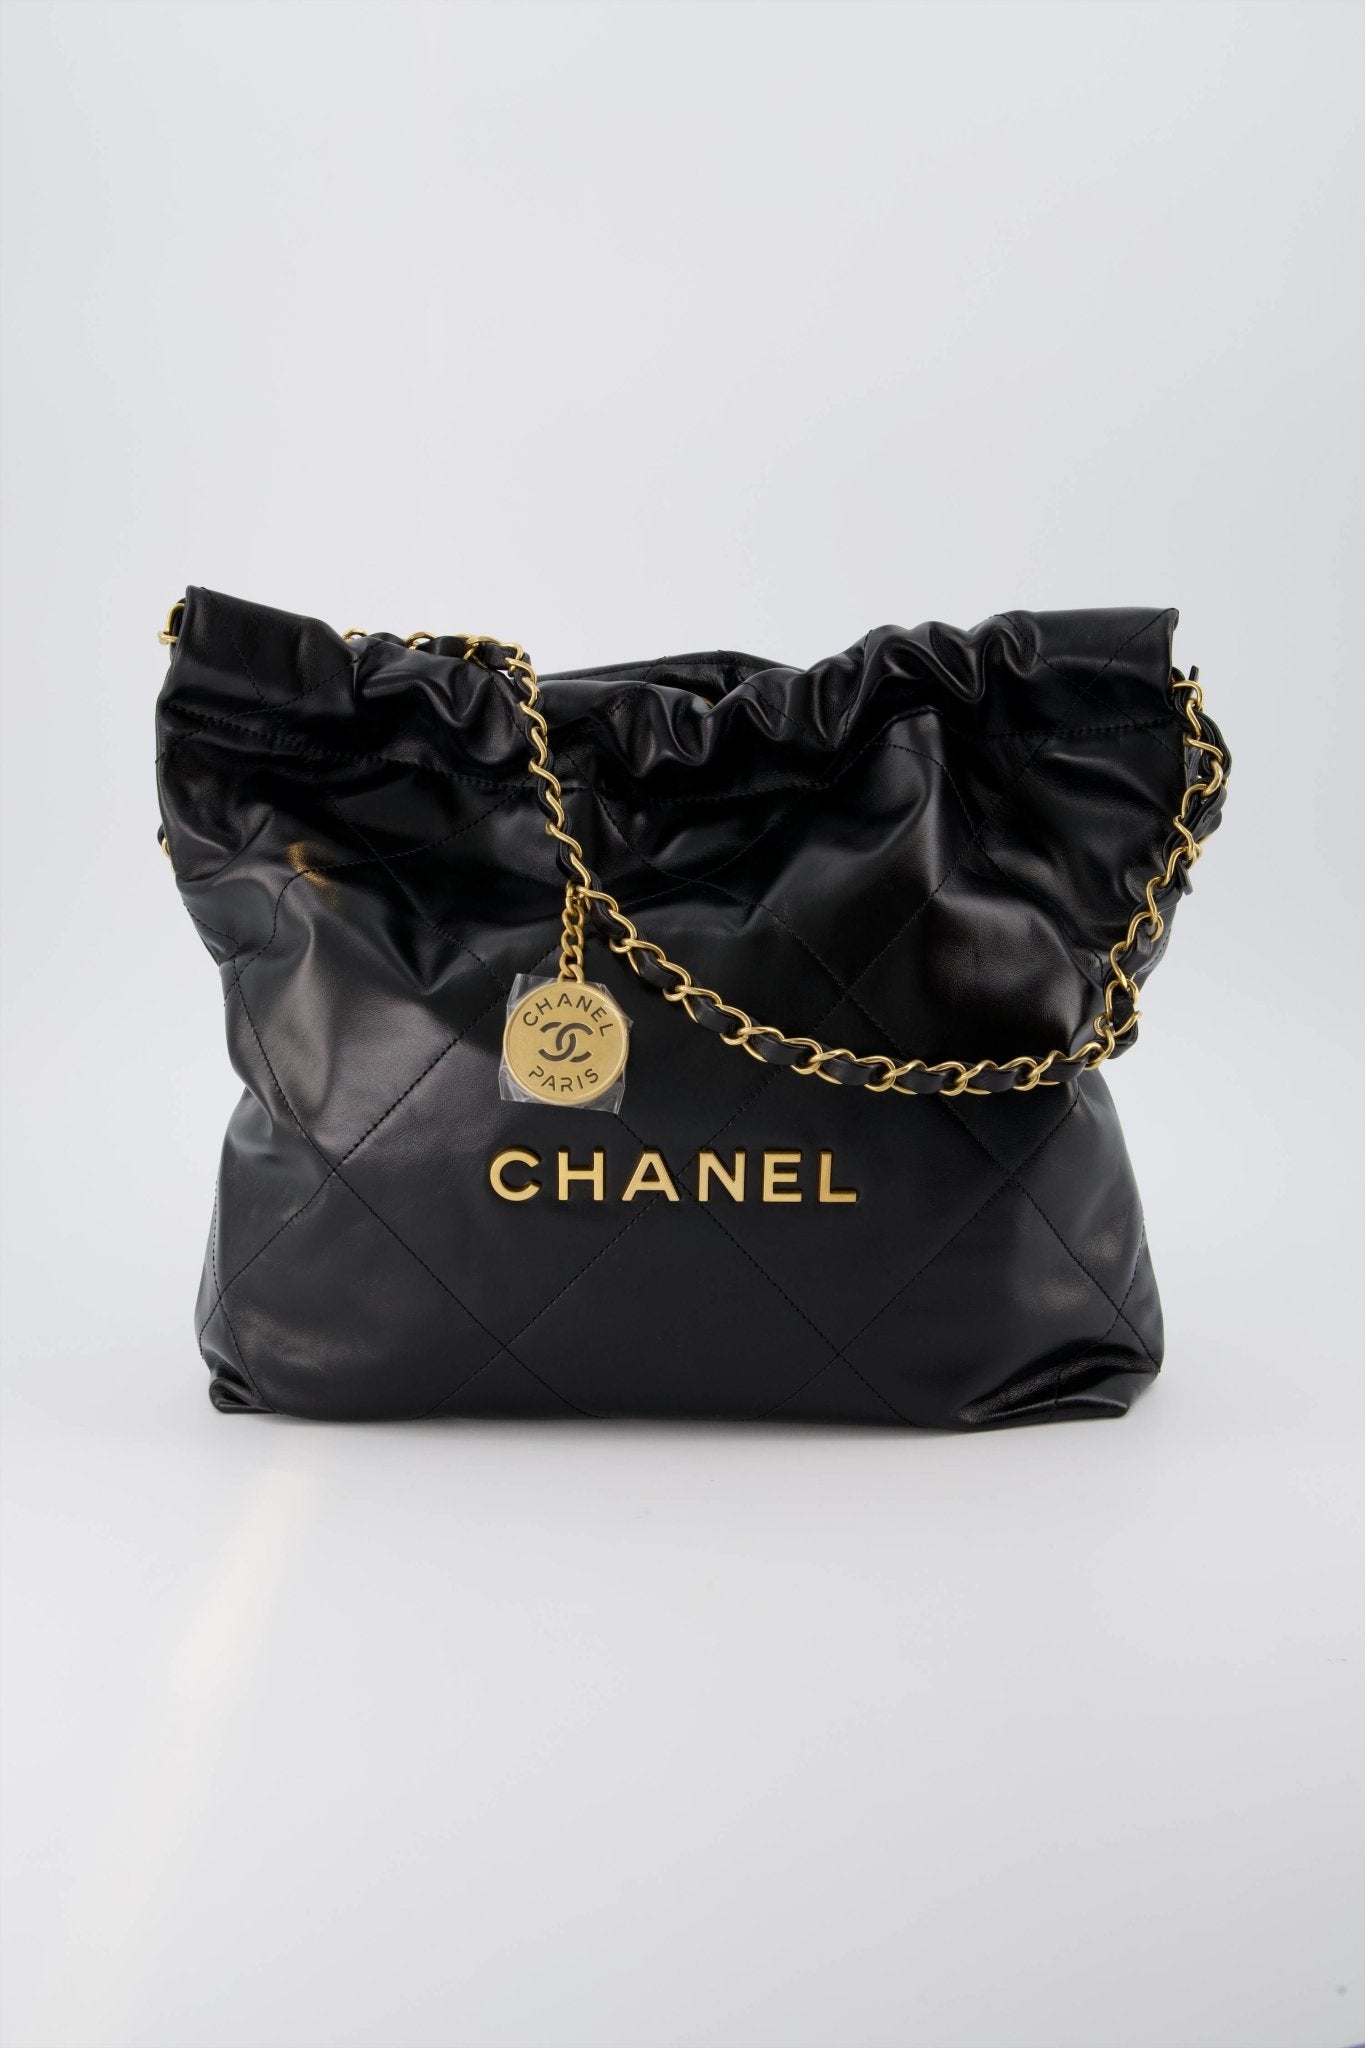 What are your thoughts on replica Chanel bags? Do you think they're worth  the purchase? - Quora